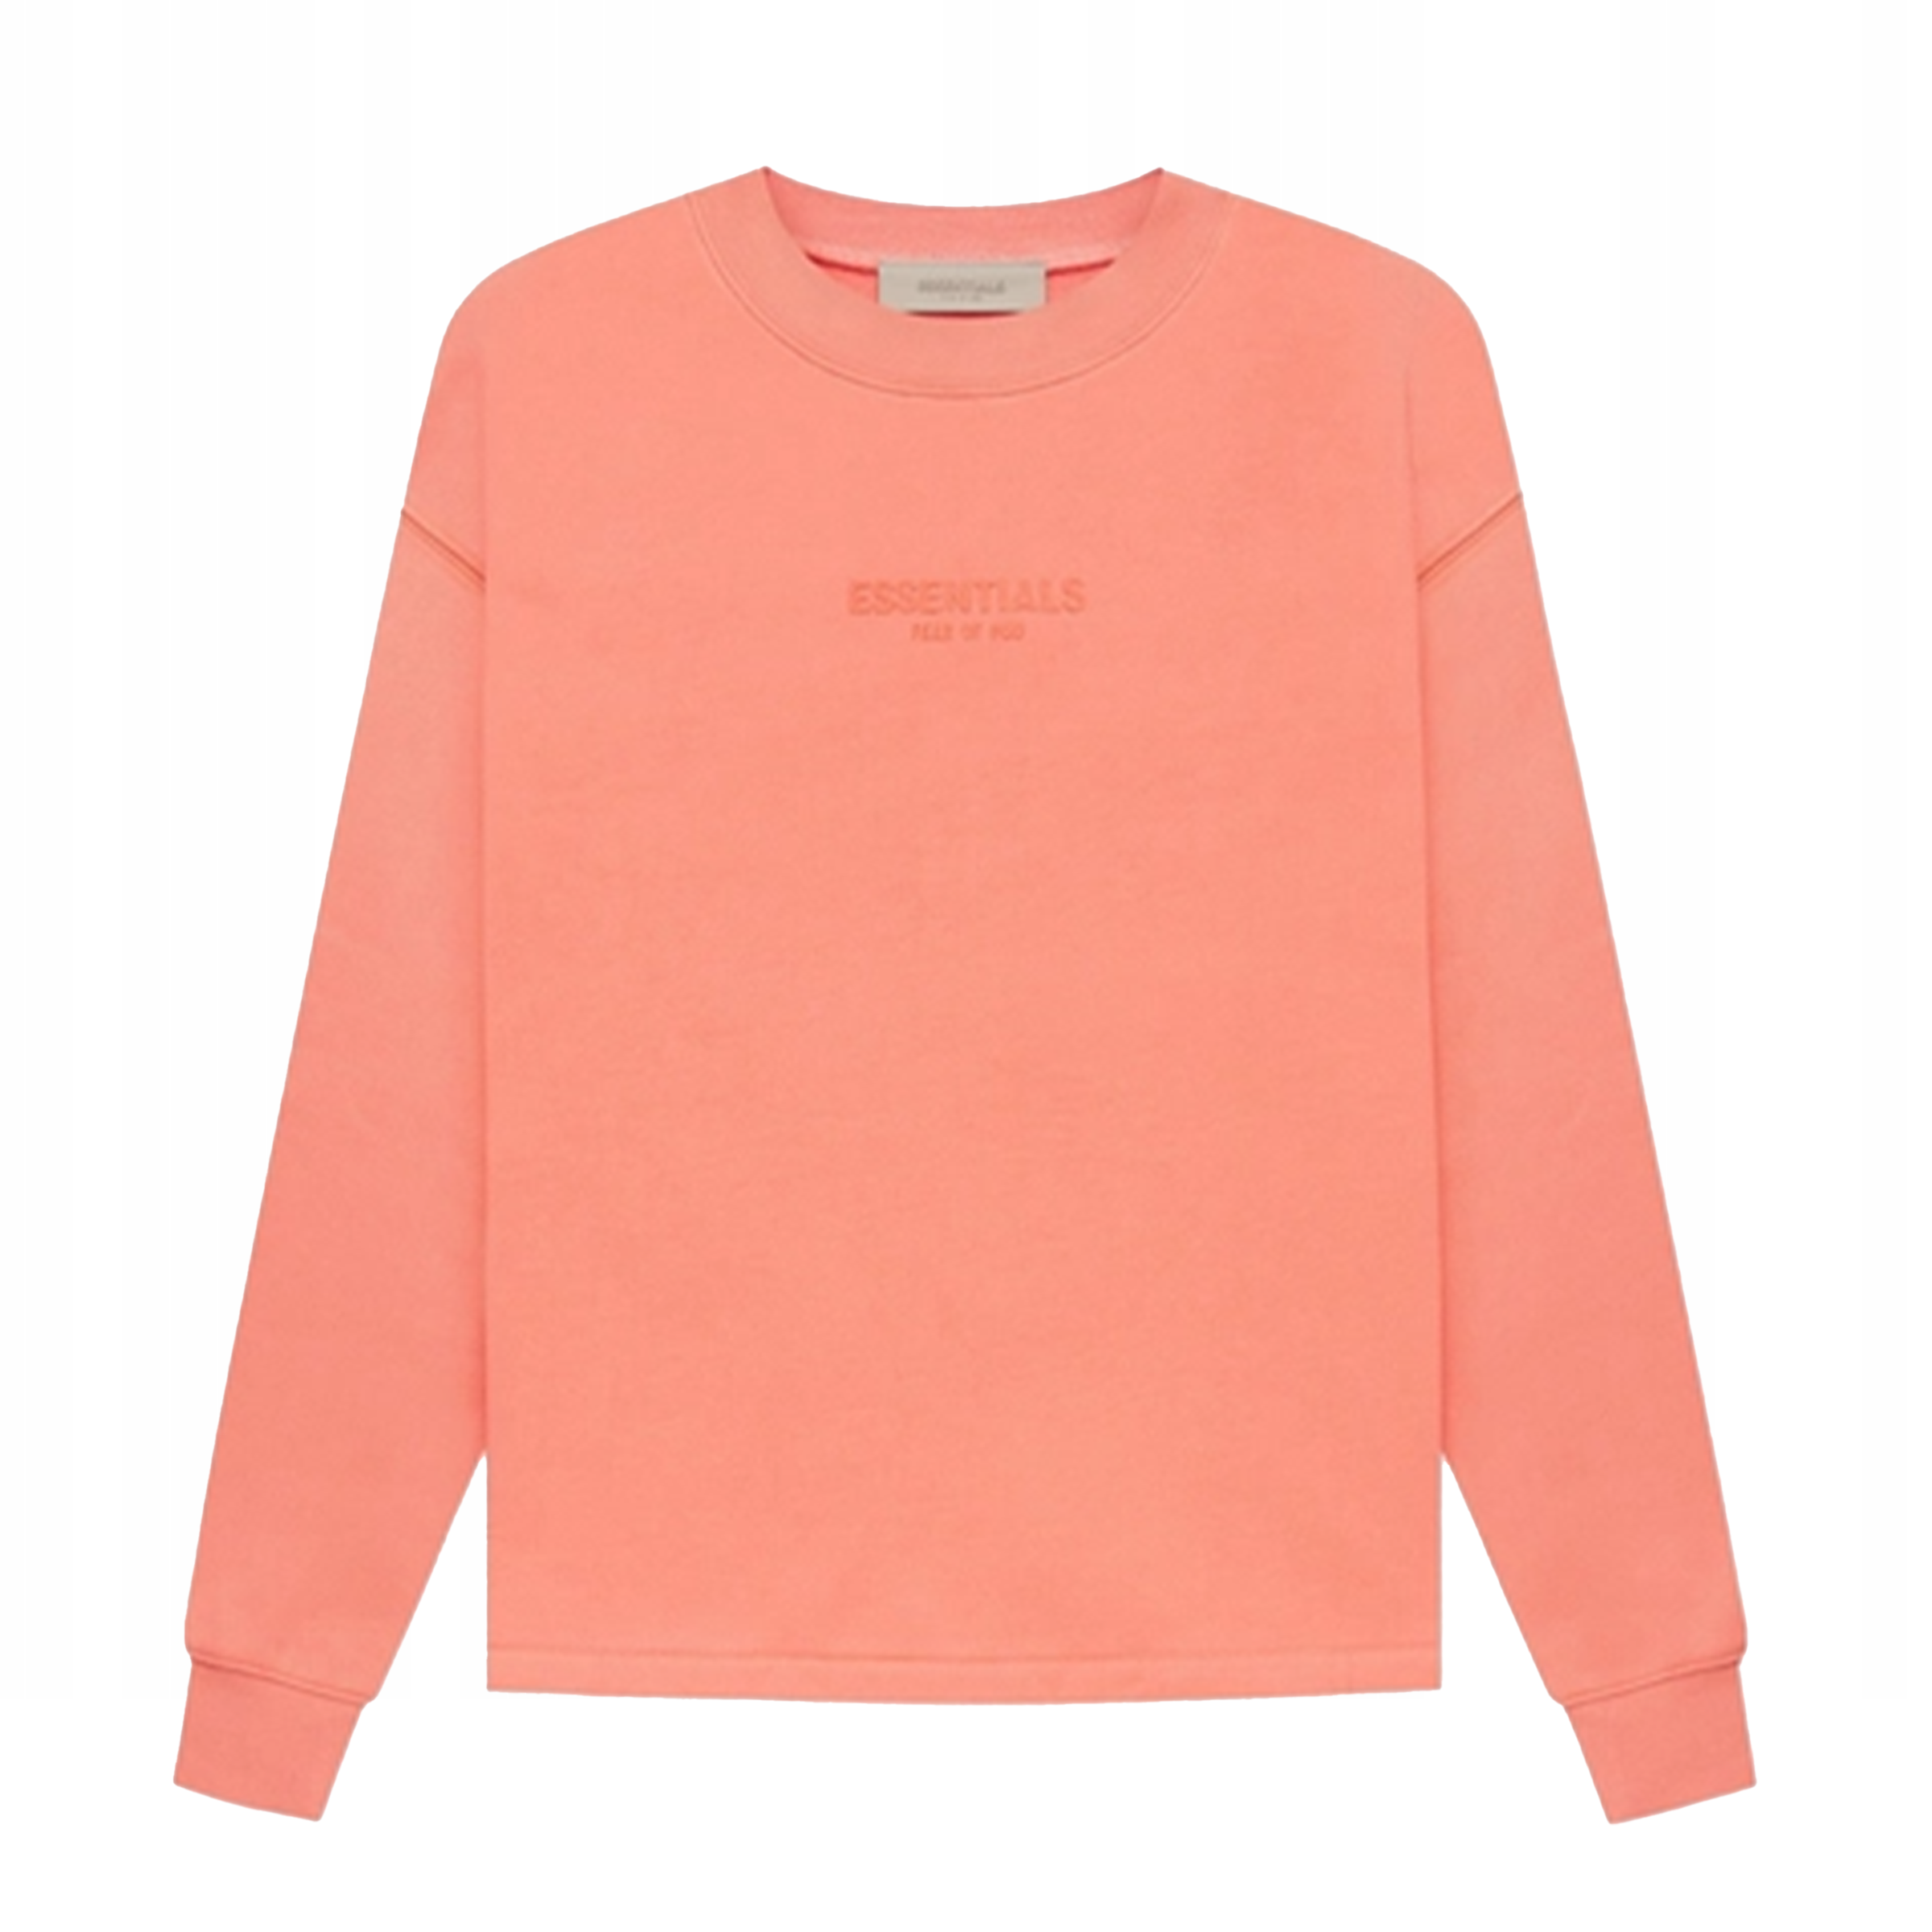 Fear Of God Essentials - Woman's "Pink Relaxed" Sweatshirt